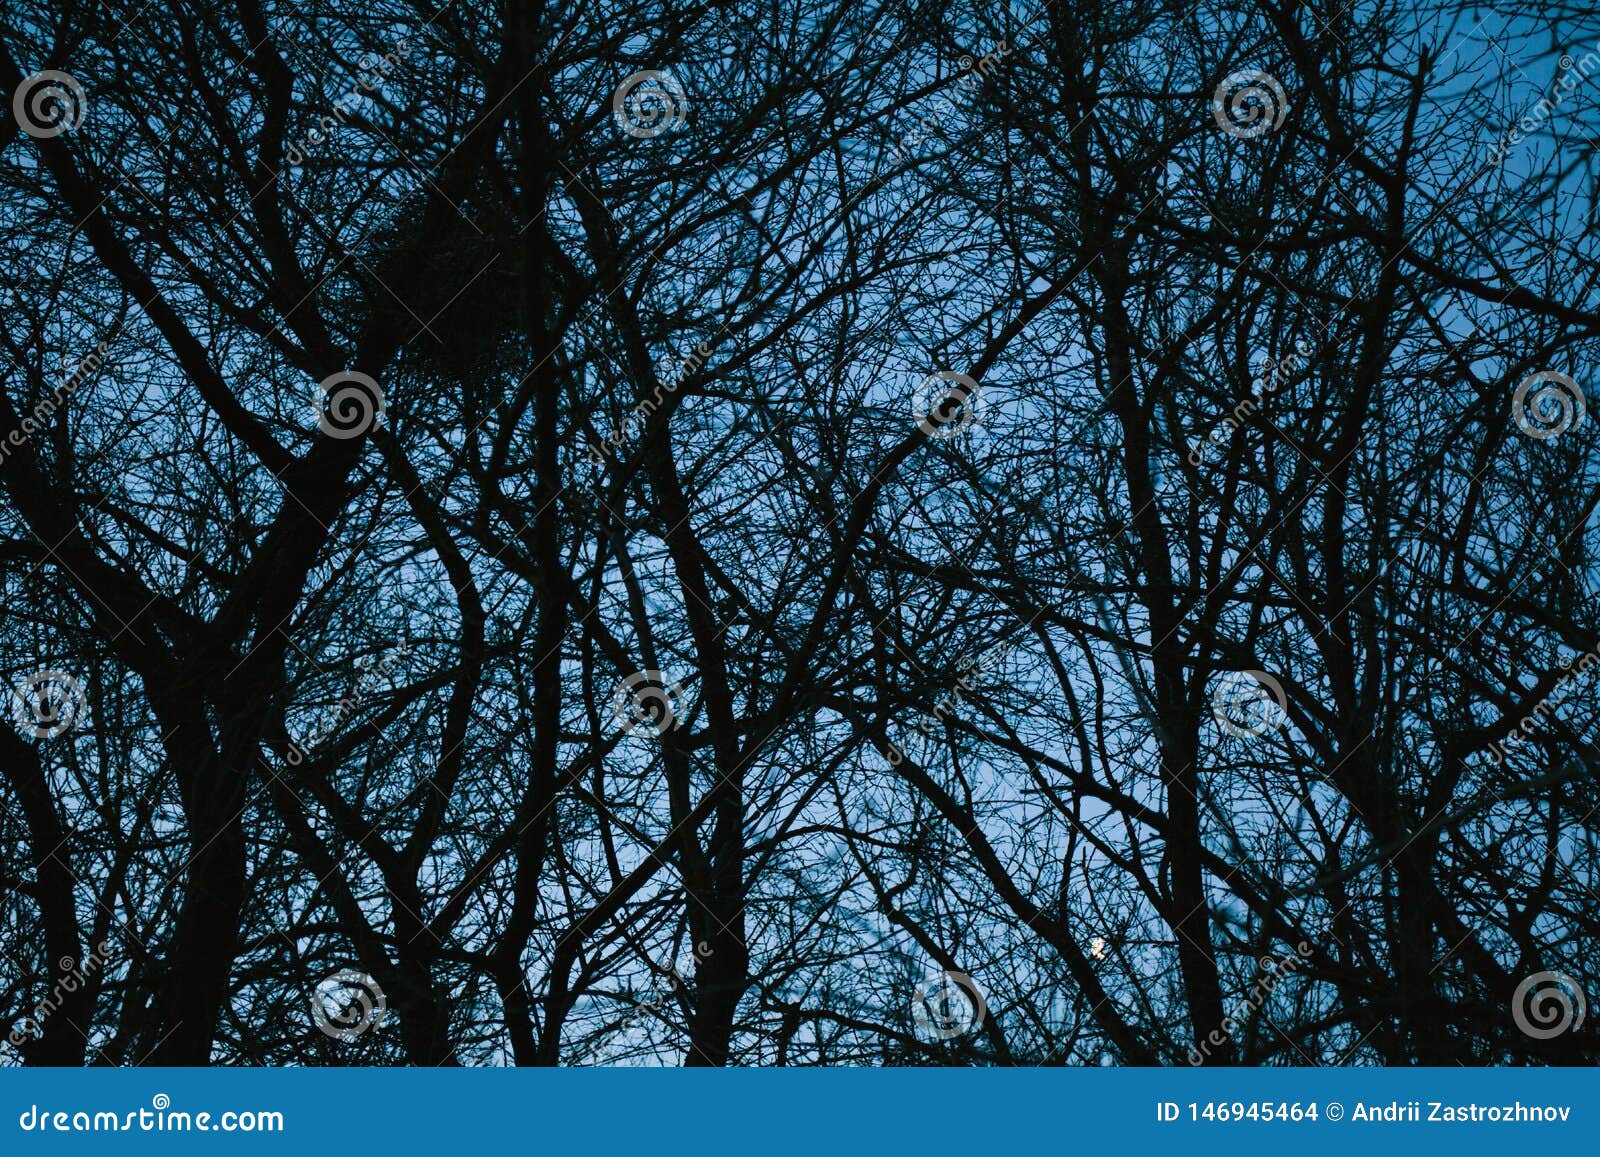 Mysterious Dark Forest, Trees and Branches Background Stock Photo